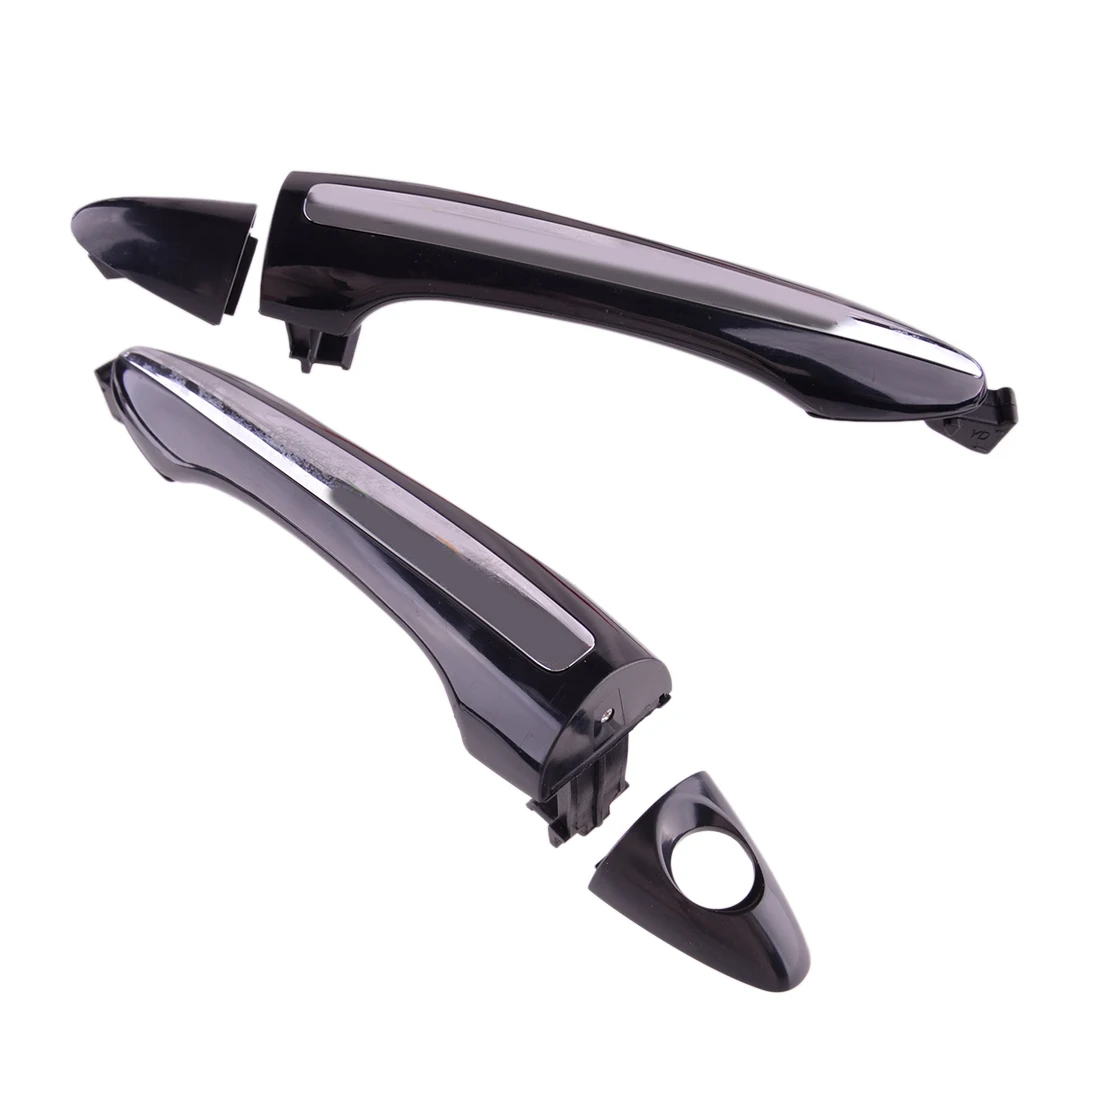 

82651-A7020 1 Set Car Exterior Front Rear Left Right Door Handle 82652A7020 Fit for Kia Forte Cerato 2014 2015 2016 2017 2018